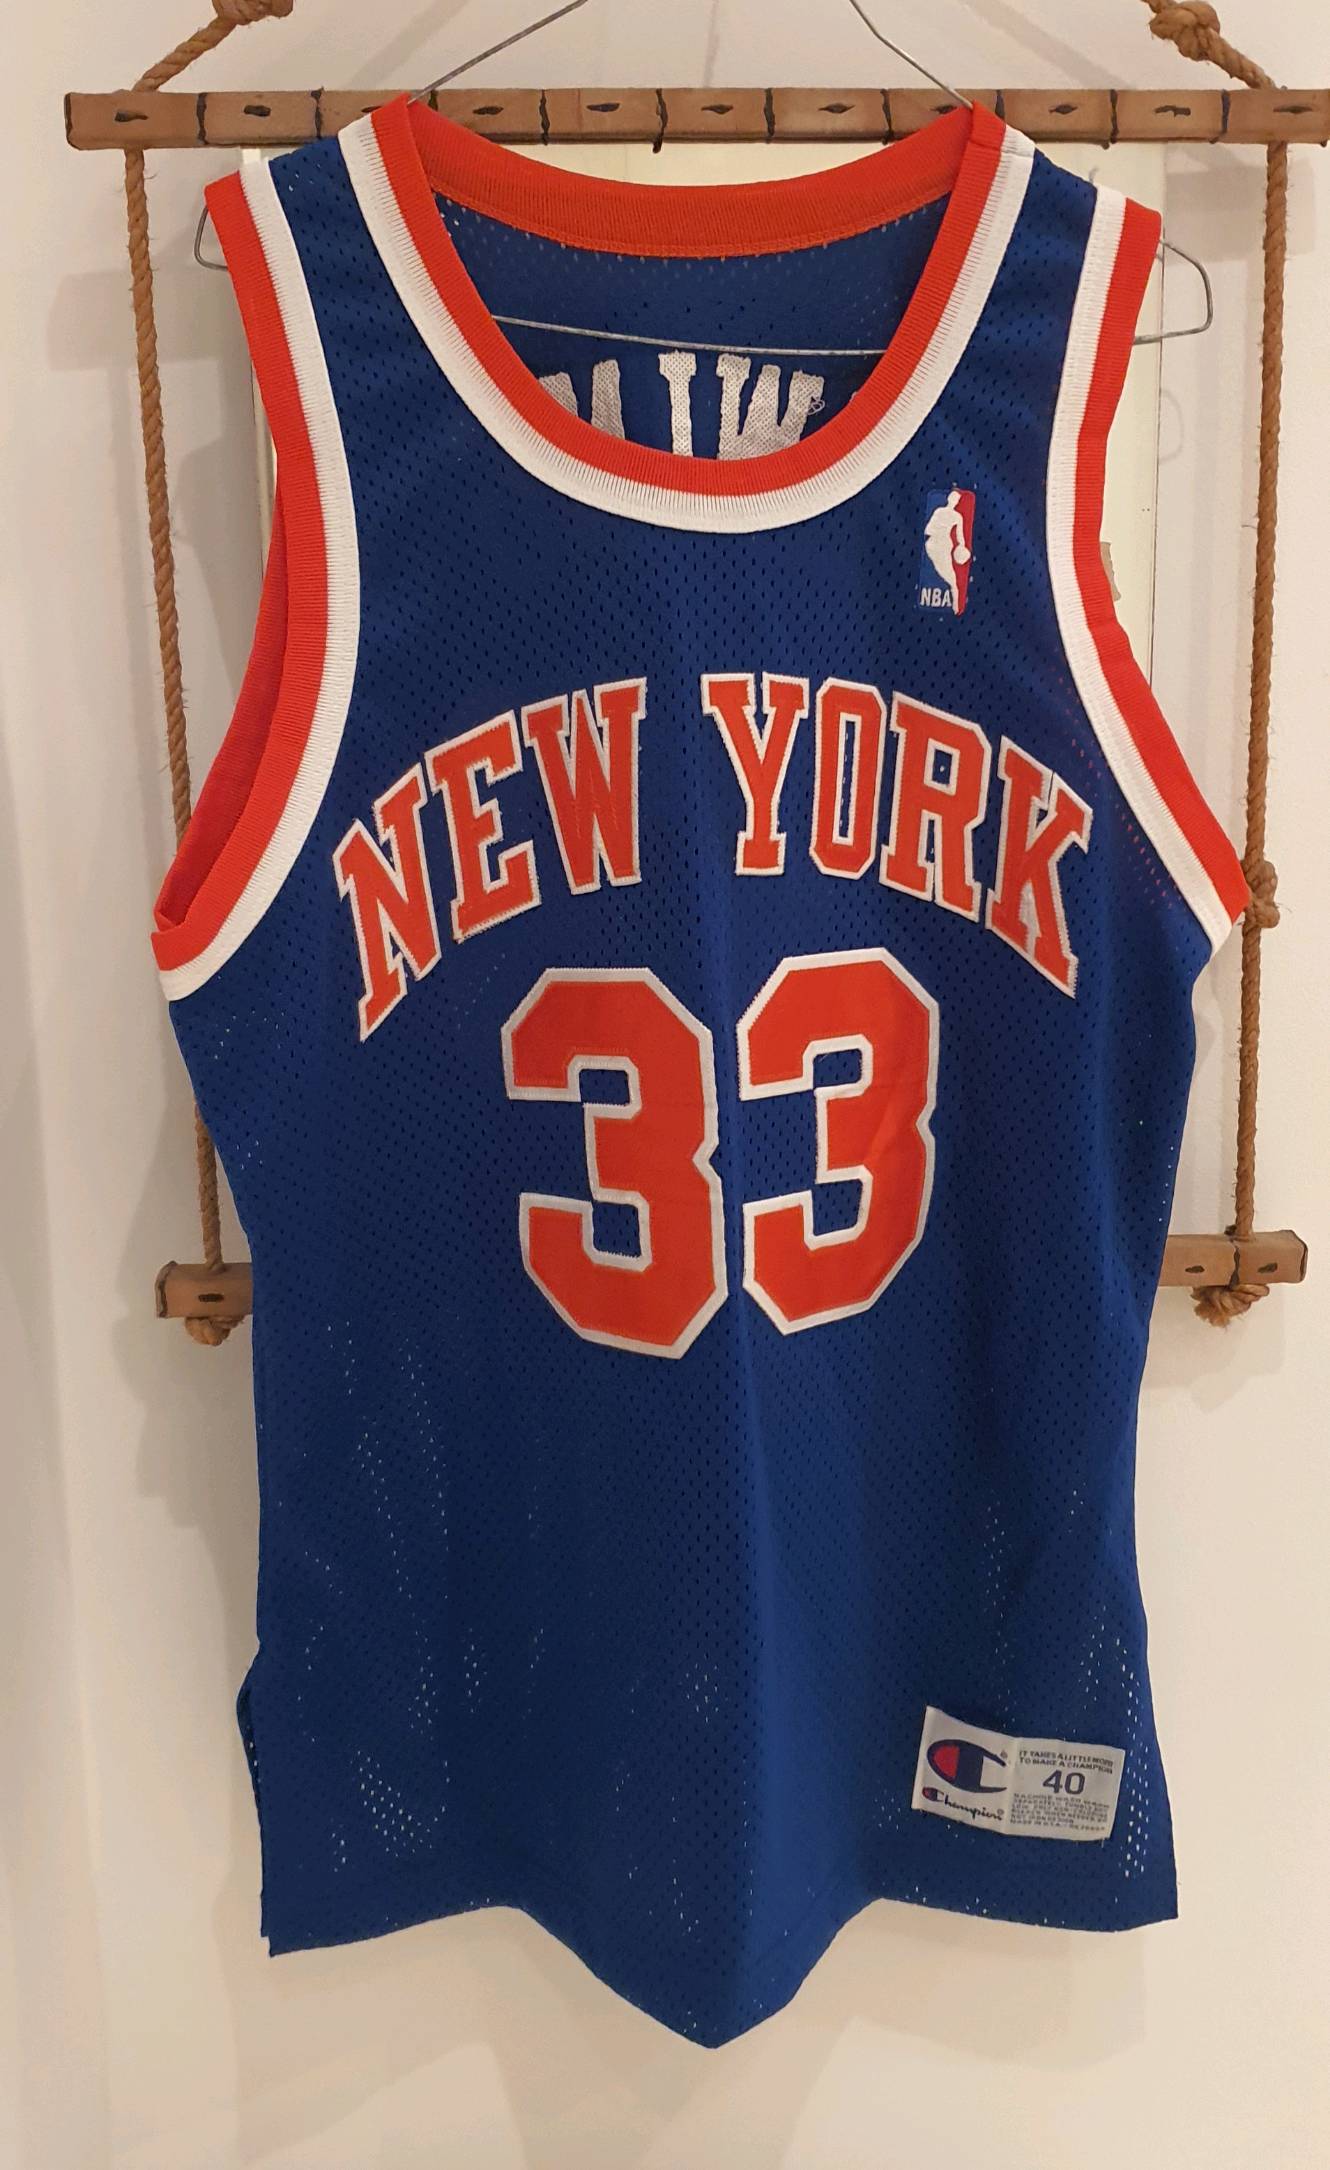 🏀 Patrick Ewing New York Knicks Jersey Size Small – The Throwback